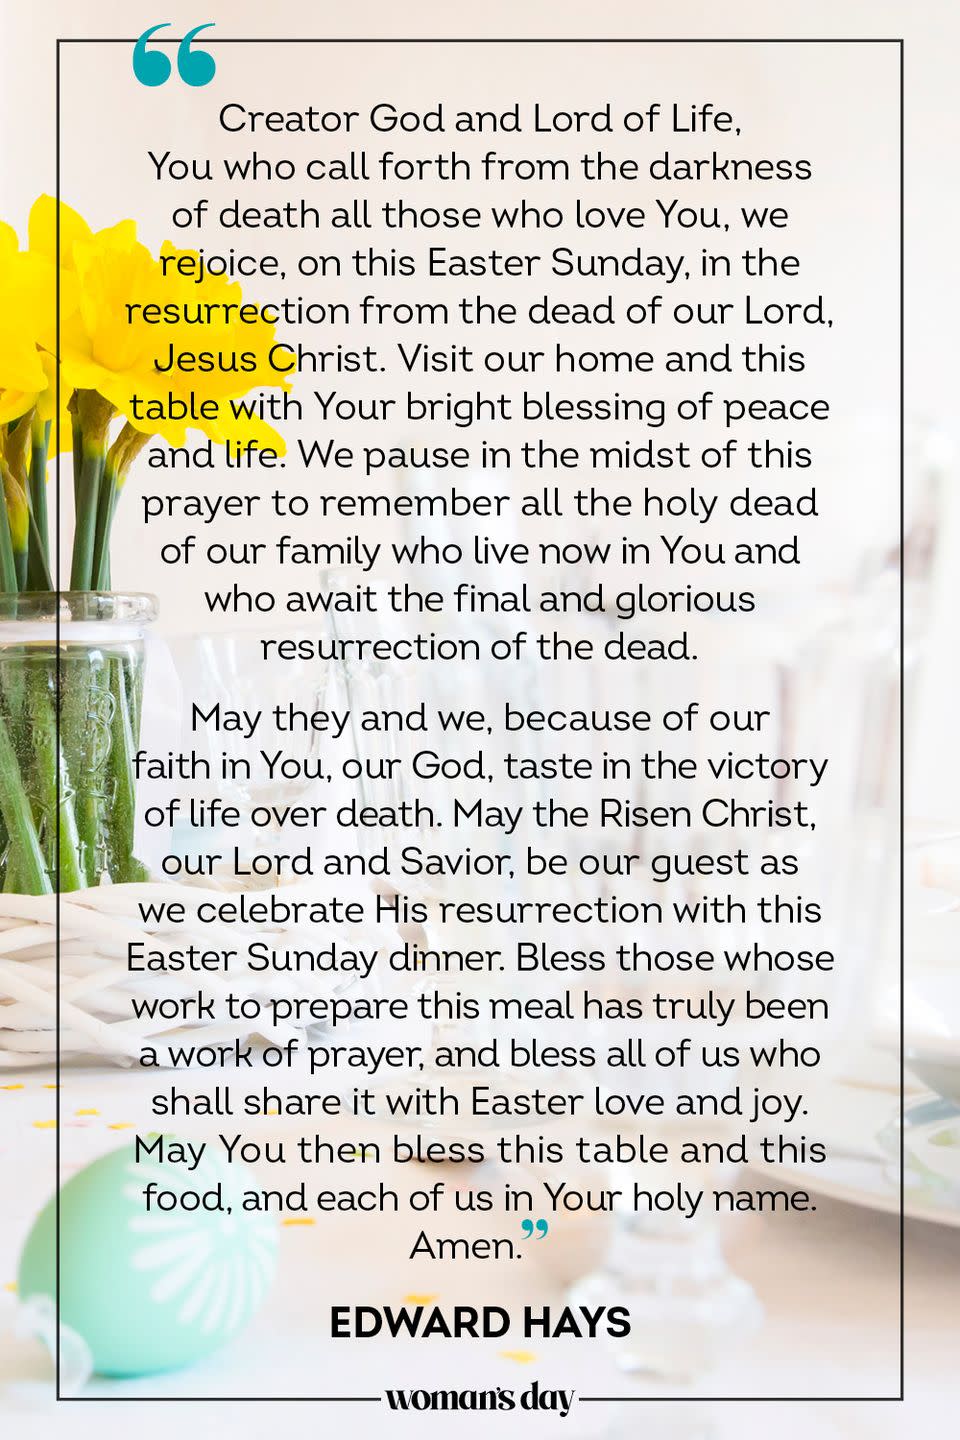 <p>Creator God and Lord of Life, You who call forth from the darkness of death all those who love You, we rejoice, on this Easter Sunday, in the resurrection from the dead of our Lord, Jesus Christ. Visit our home and this table with Your bright blessing of peace and life. We pause in the midst of this prayer to remember all the holy dead of our family who live now in You and who await the final and glorious resurrection of the dead.</p><p>May they and we, because of our faith in You, our God, taste in the victory of life over death. May the Risen Christ, our Lord and Savior, be our guest as we celebrate His resurrection with this Easter Sunday dinner. Bless those whose work to prepare this meal has truly been a work of prayer, and bless all of us who shall share it with Easter love and joy. May You then bless this table and this food, and each of us in Your holy name. Amen.</p><p>— Edward Hays</p>